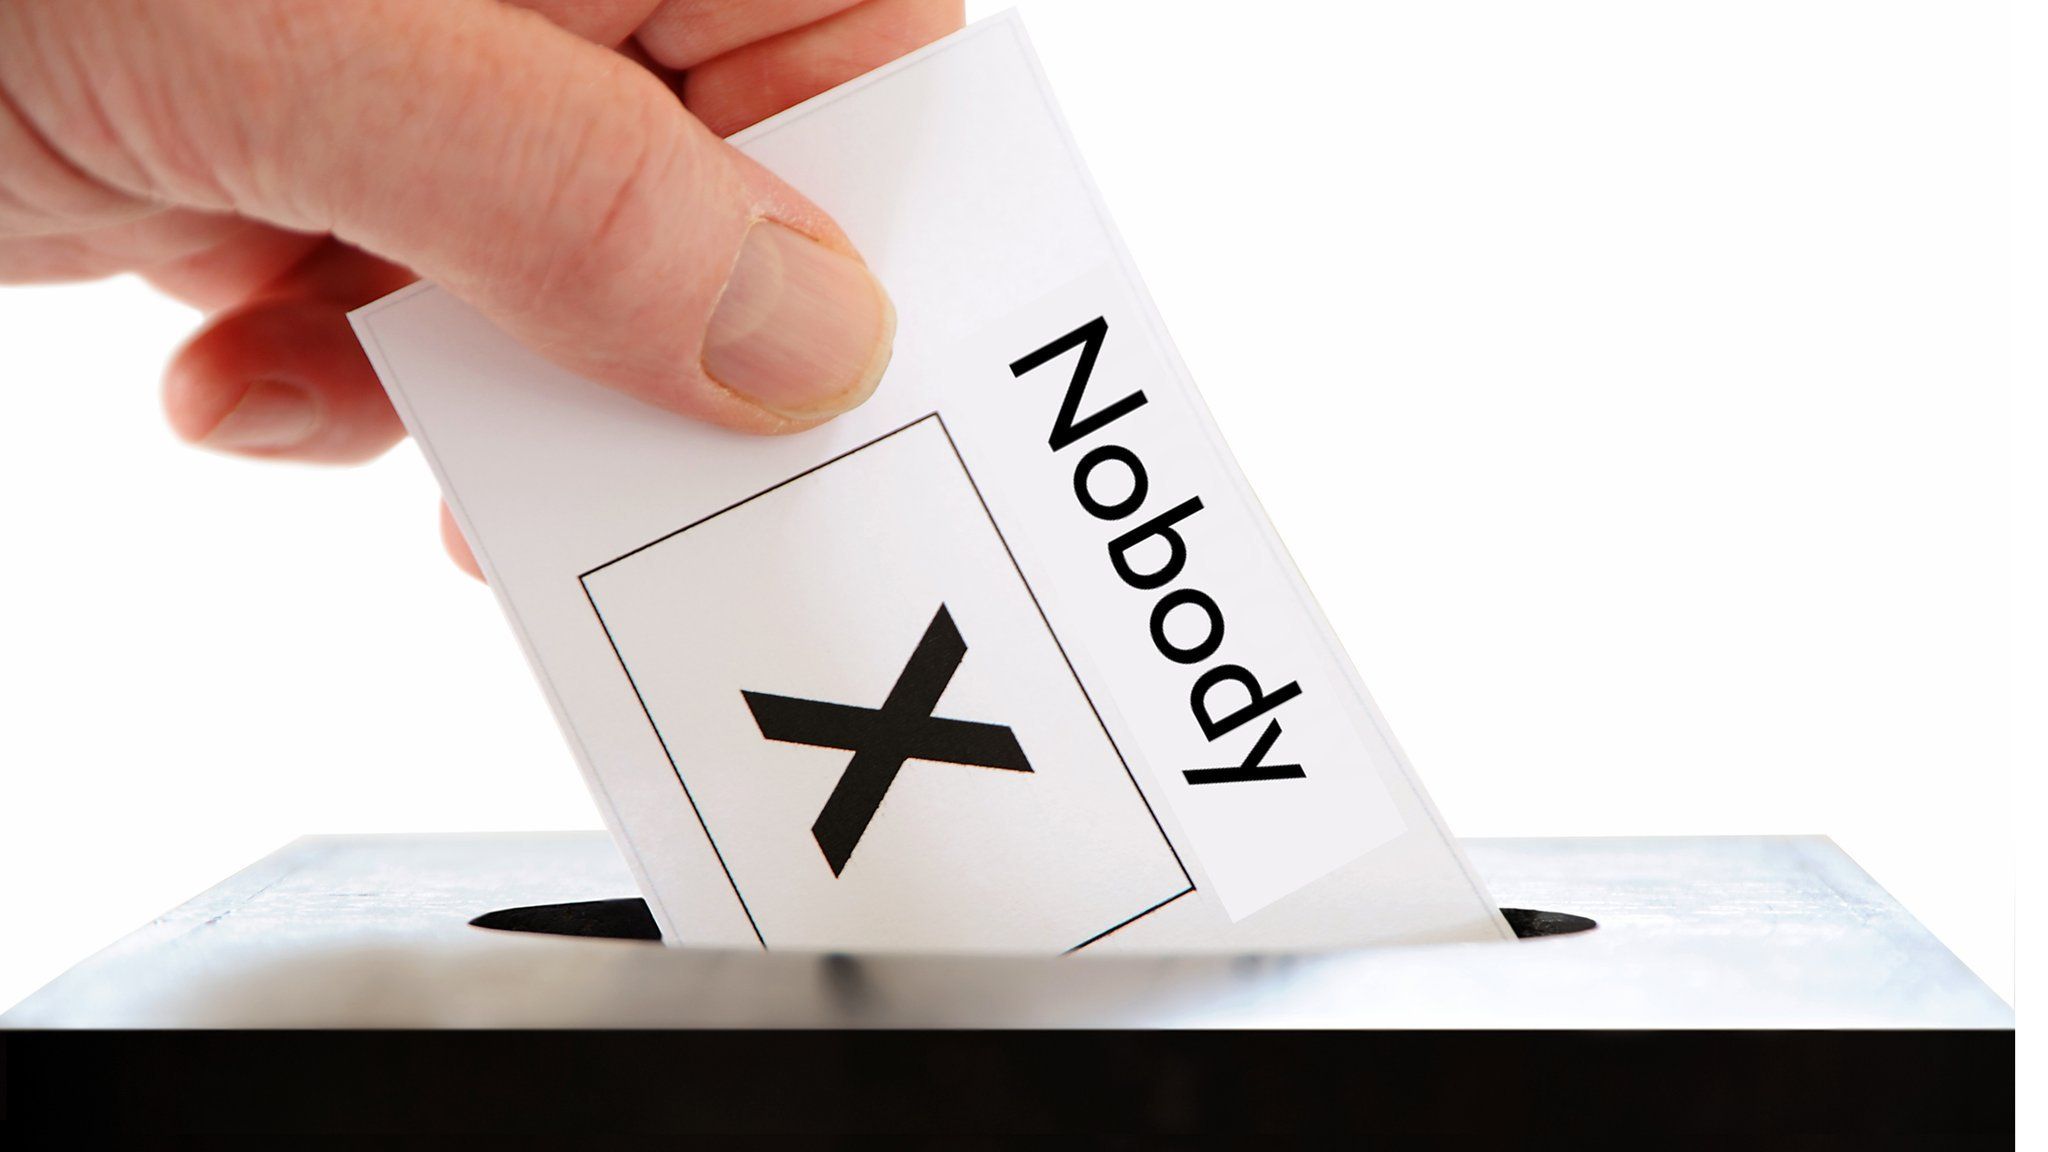 A man's hand dropping in a ballot for "nobody"